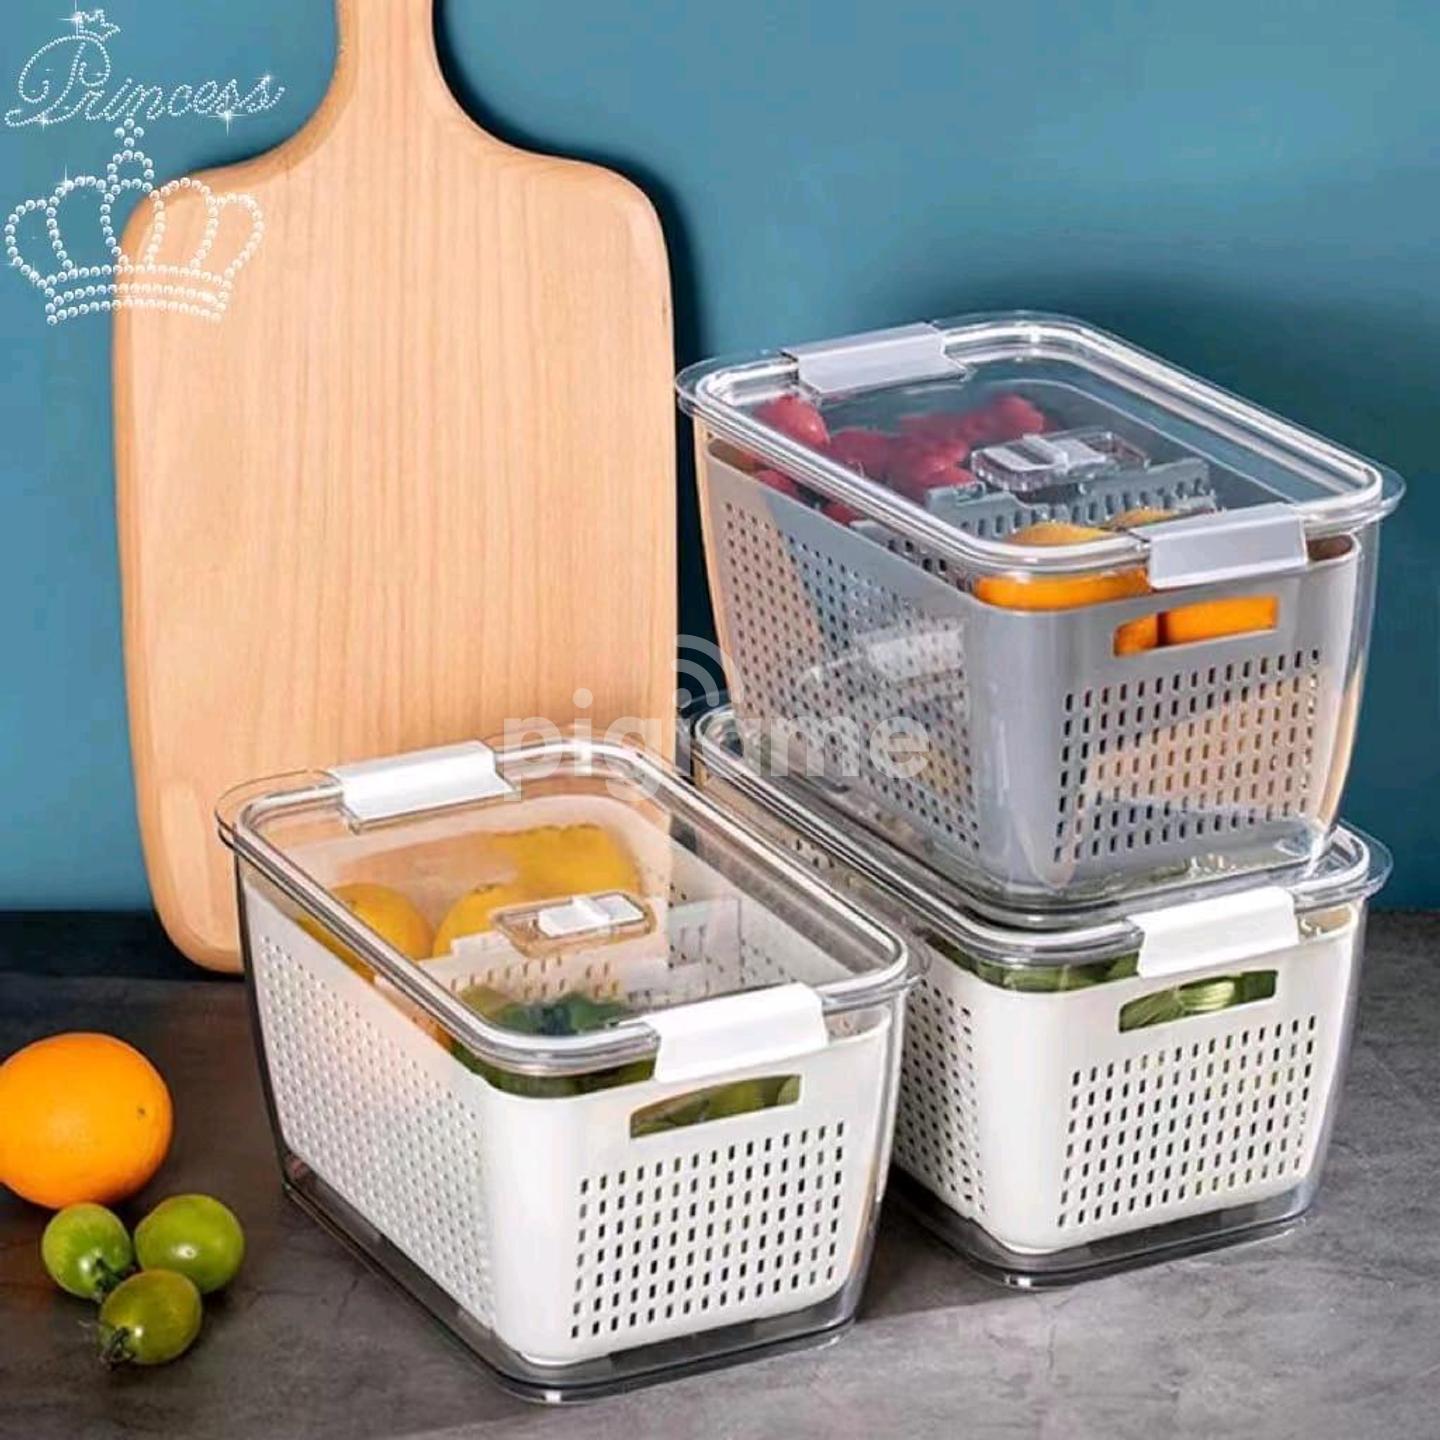 Luxear Fresh Food Storage Containers 4.5 L in Nairobi CBD, Accra Road